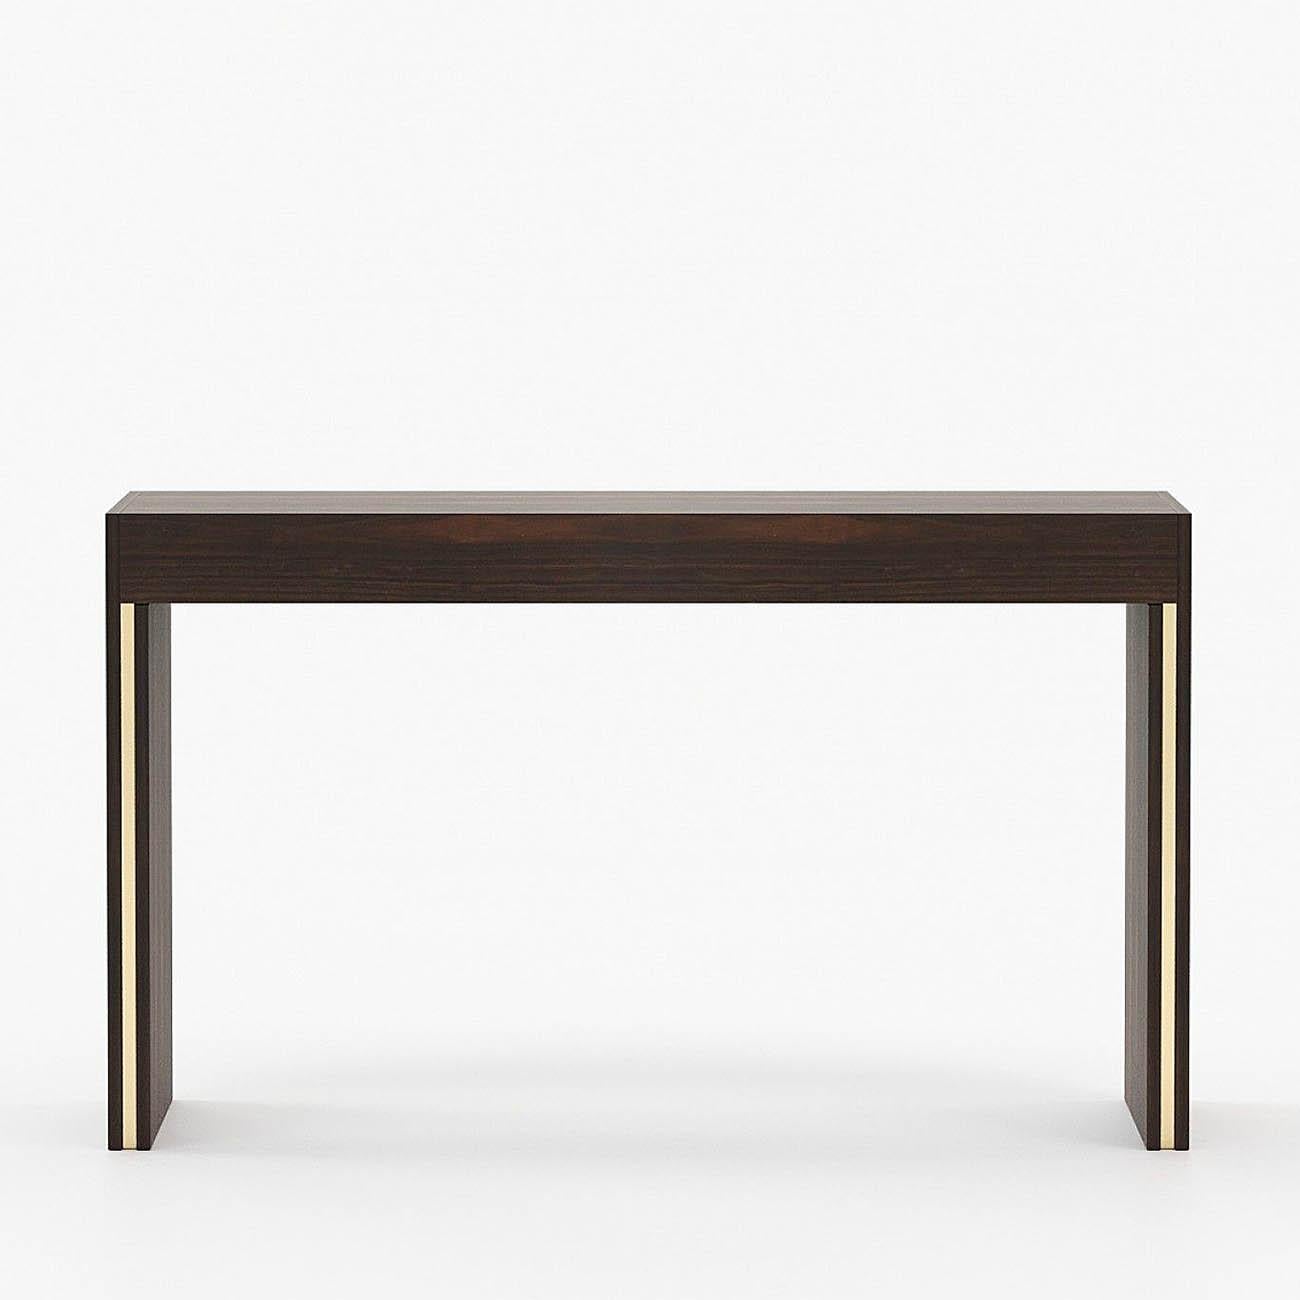 Console table bold with structure in eucalyptus wood
veneer in matte finish. With 1 drawer with easy glide system.
With polished stainless steel trim in gold finish.
Also available in ebony glossy, or in grey eucalyptus glossy
or matte, or in